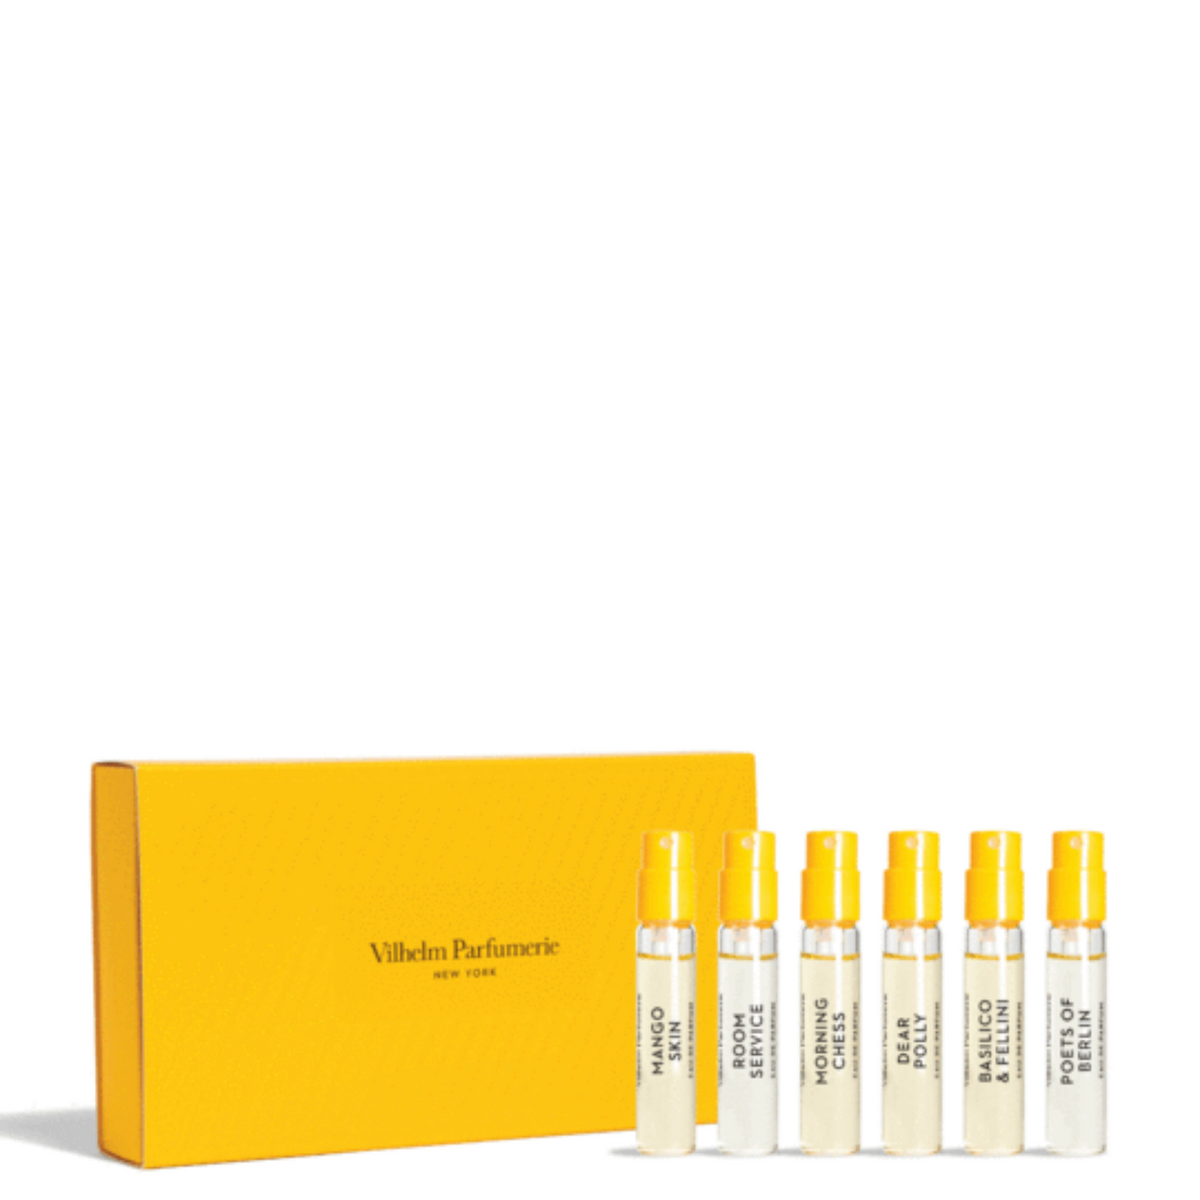 Primary Image of Parfumerie Fragrance Discovery Set